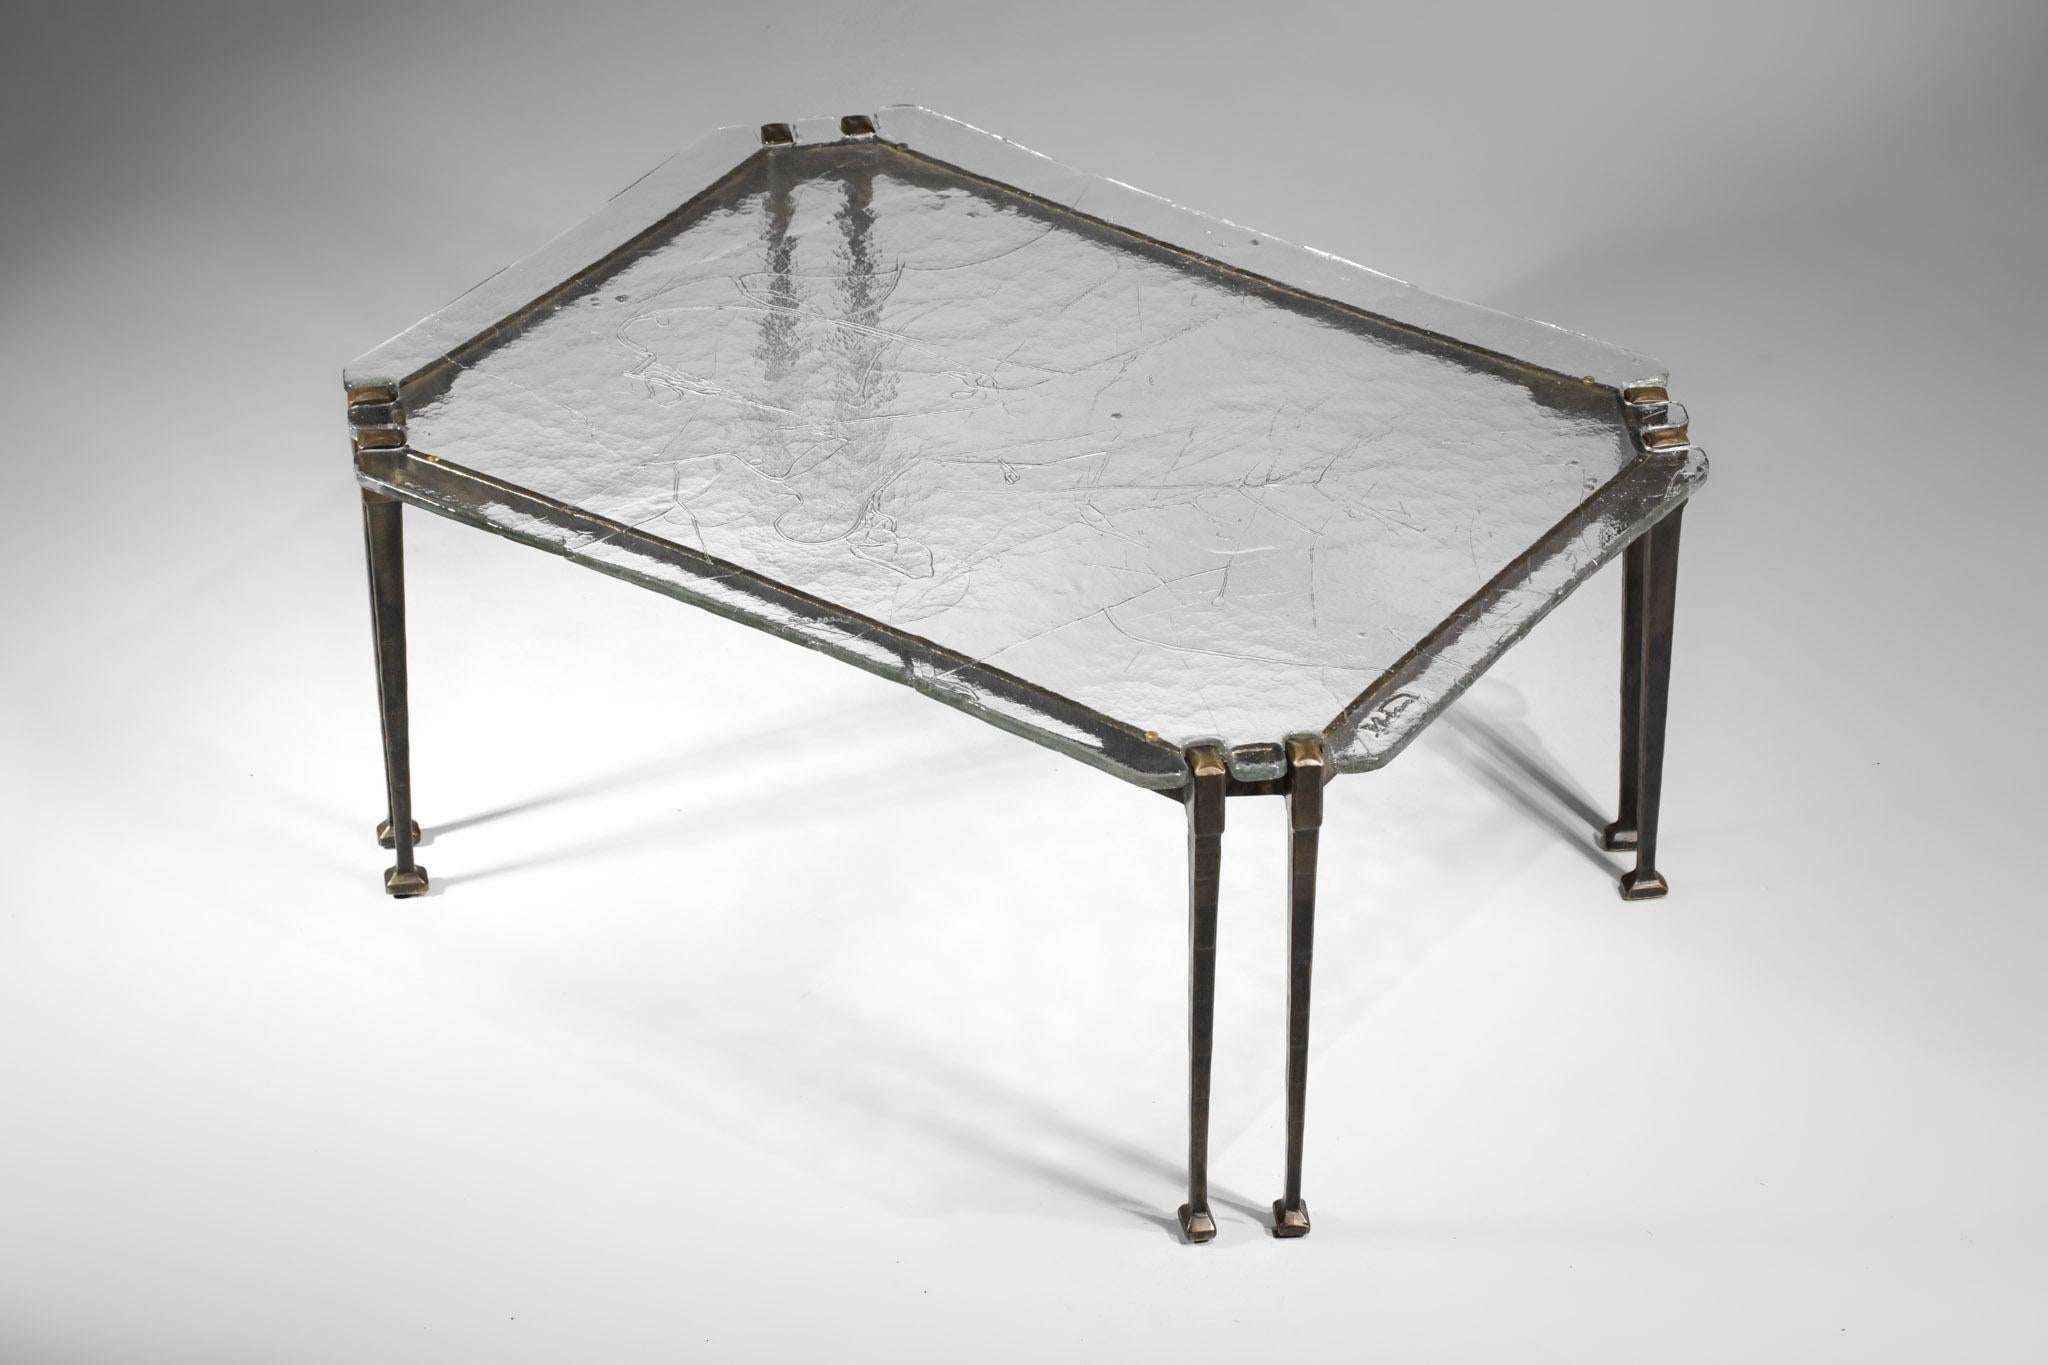 Late 20th Century Rare Lothar Klute Coffee Table with 8 Legs in Bronze and Glass German Design